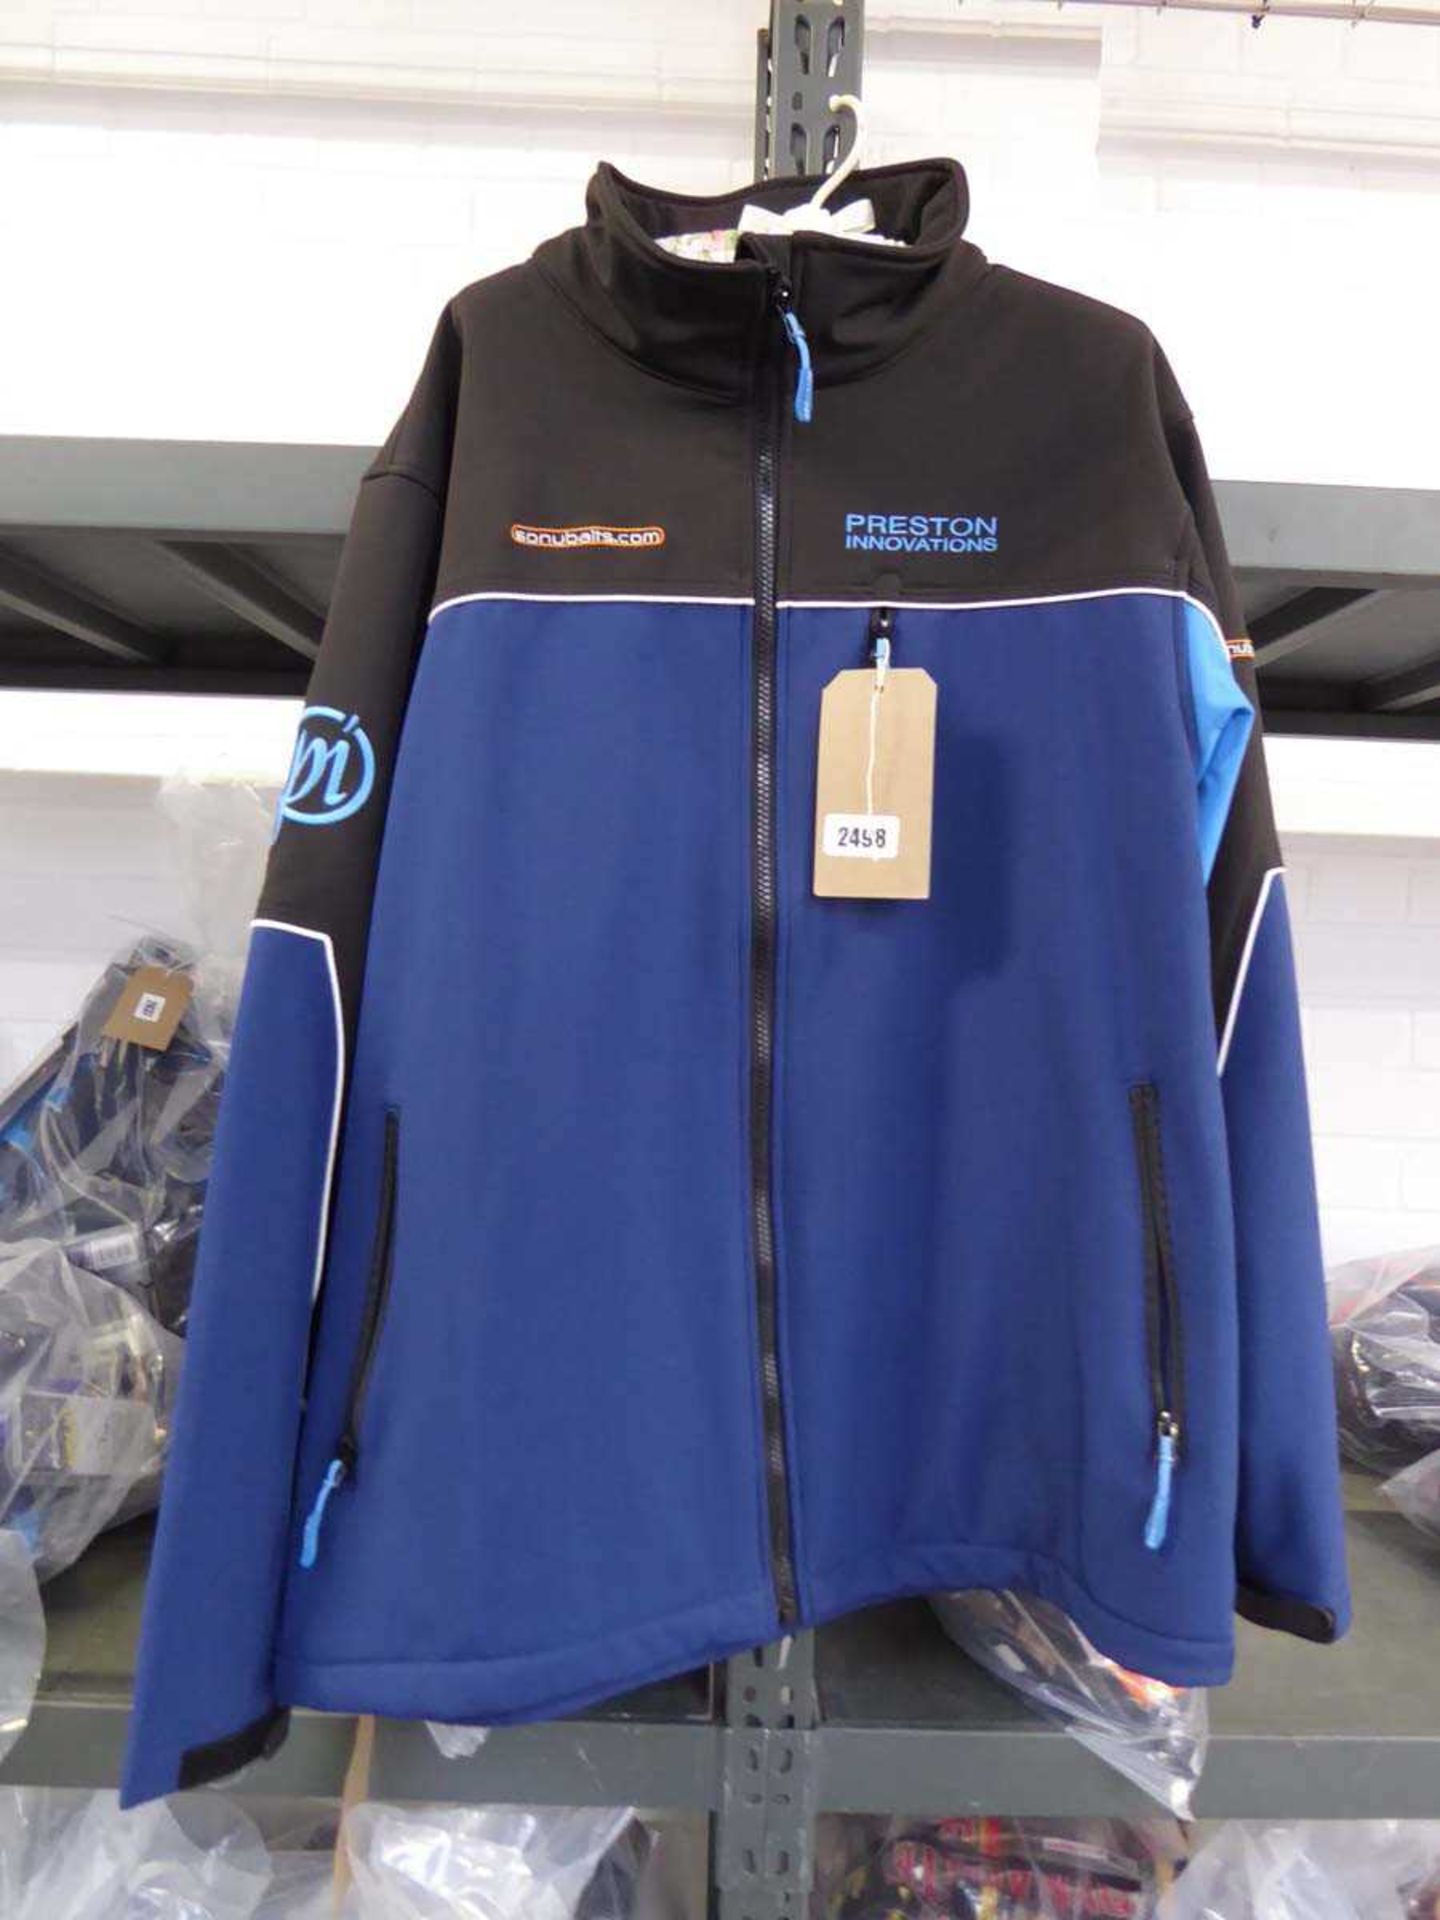 Preston Innovations national team jacket in blue and black size L